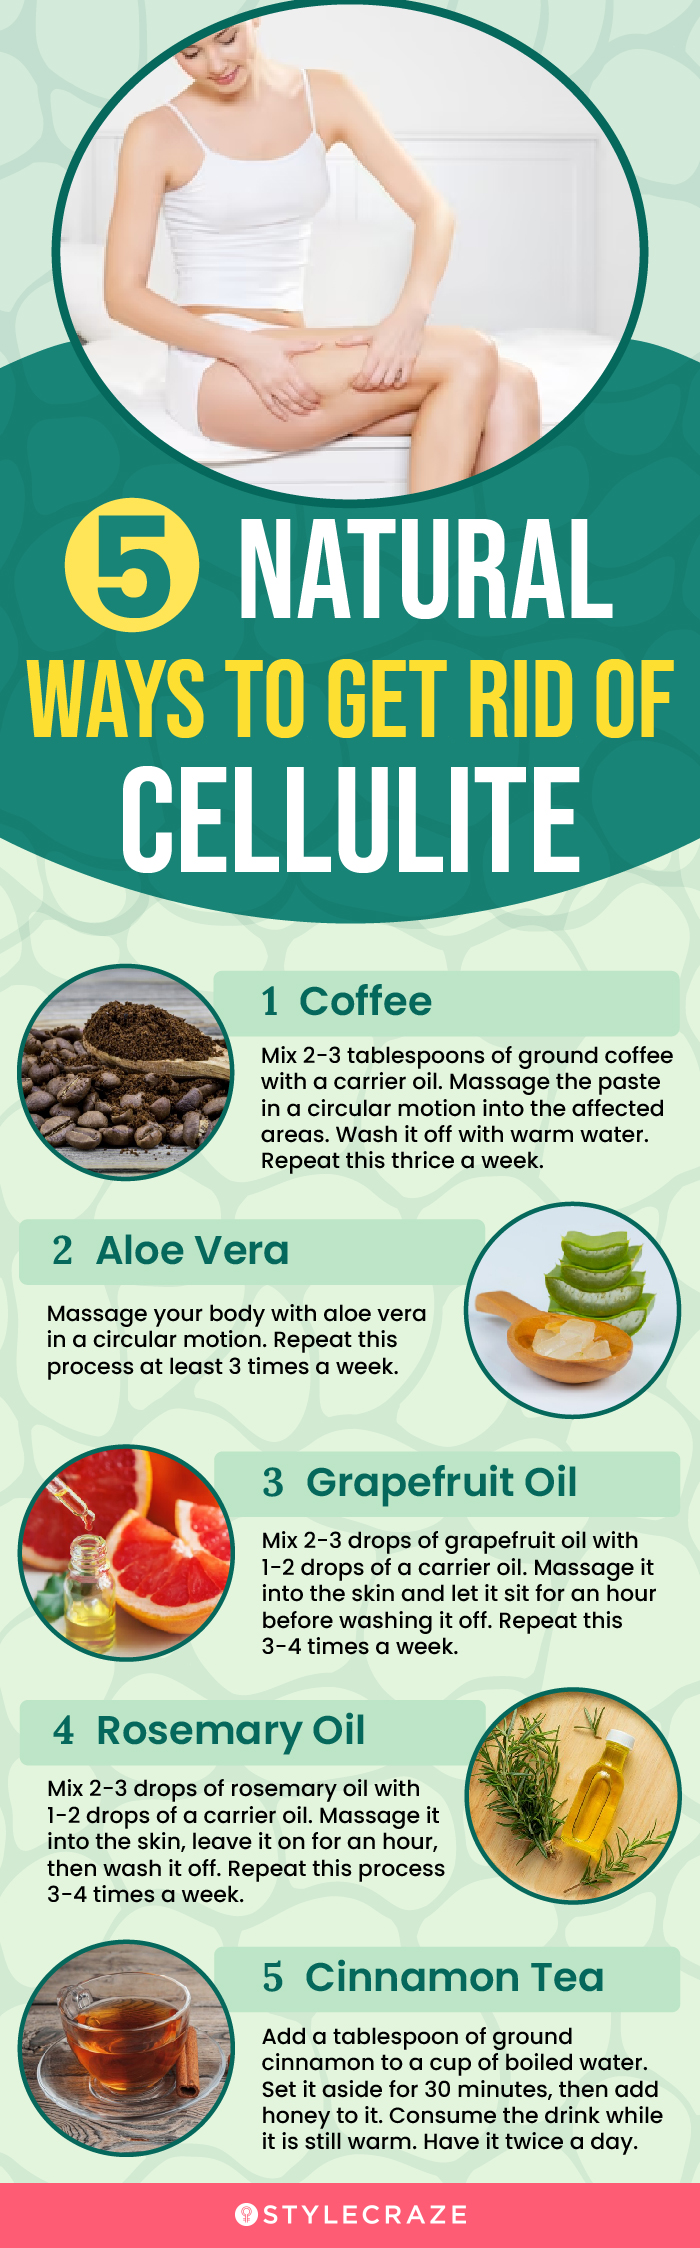 5 natural ways to get rid of cellulite (infographic)